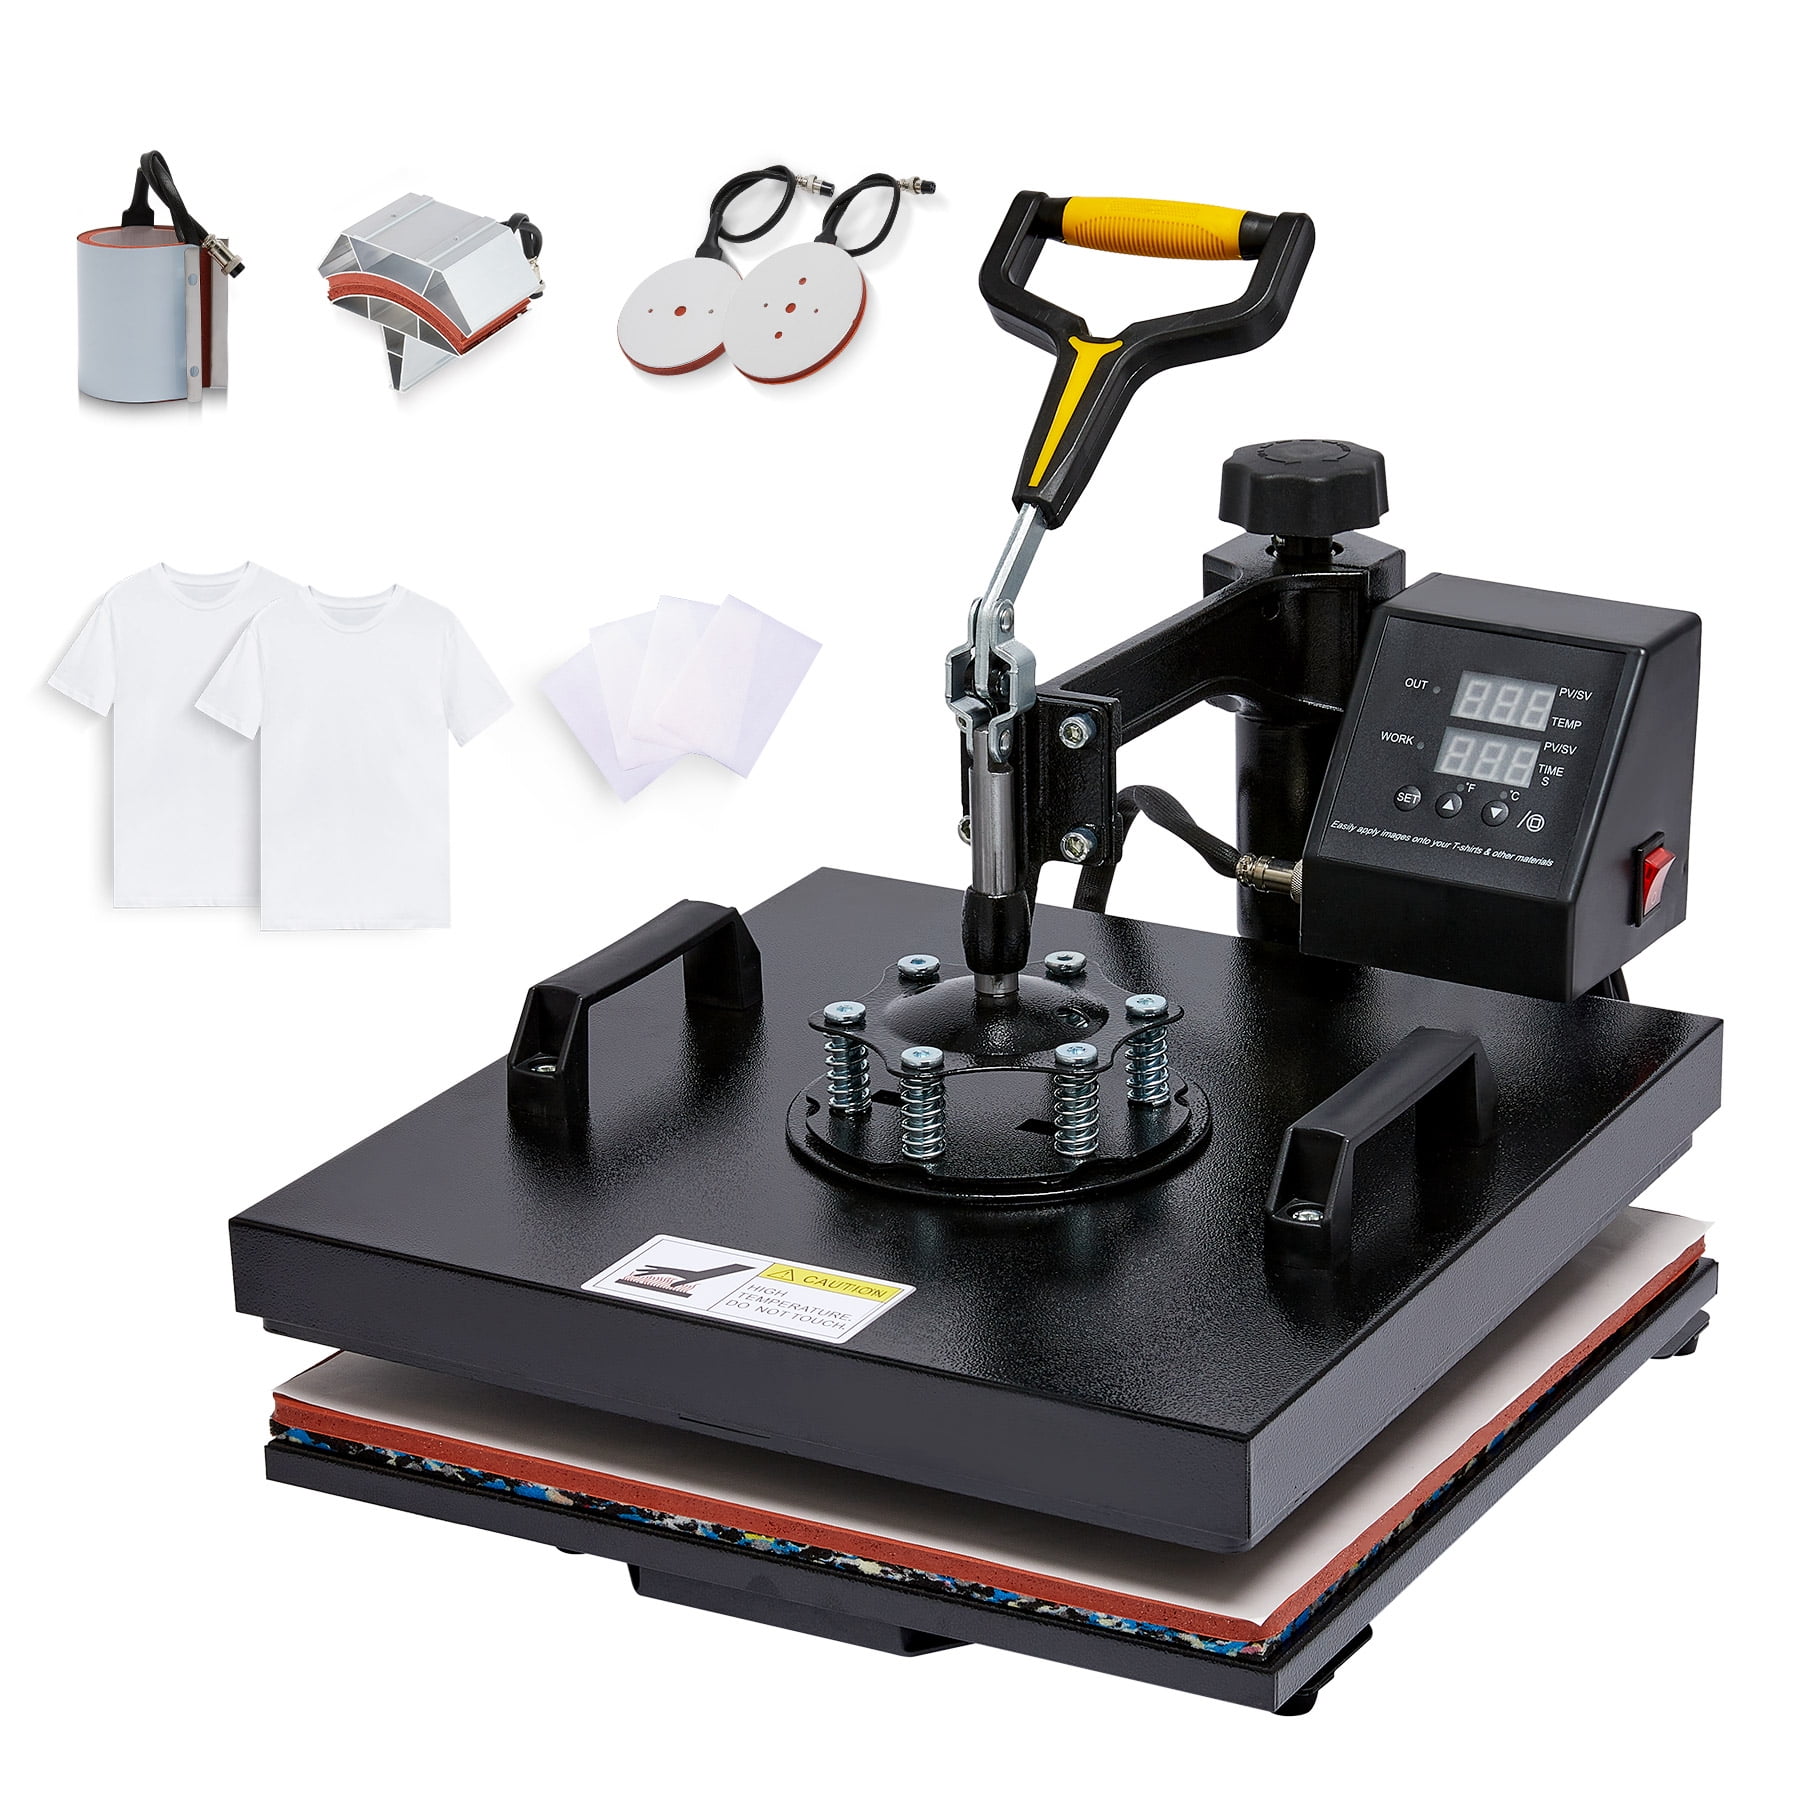 Details about   8-in-1 T Shirt Heat Press Machine Professional 360 Swing-Away Press 12x15in new 